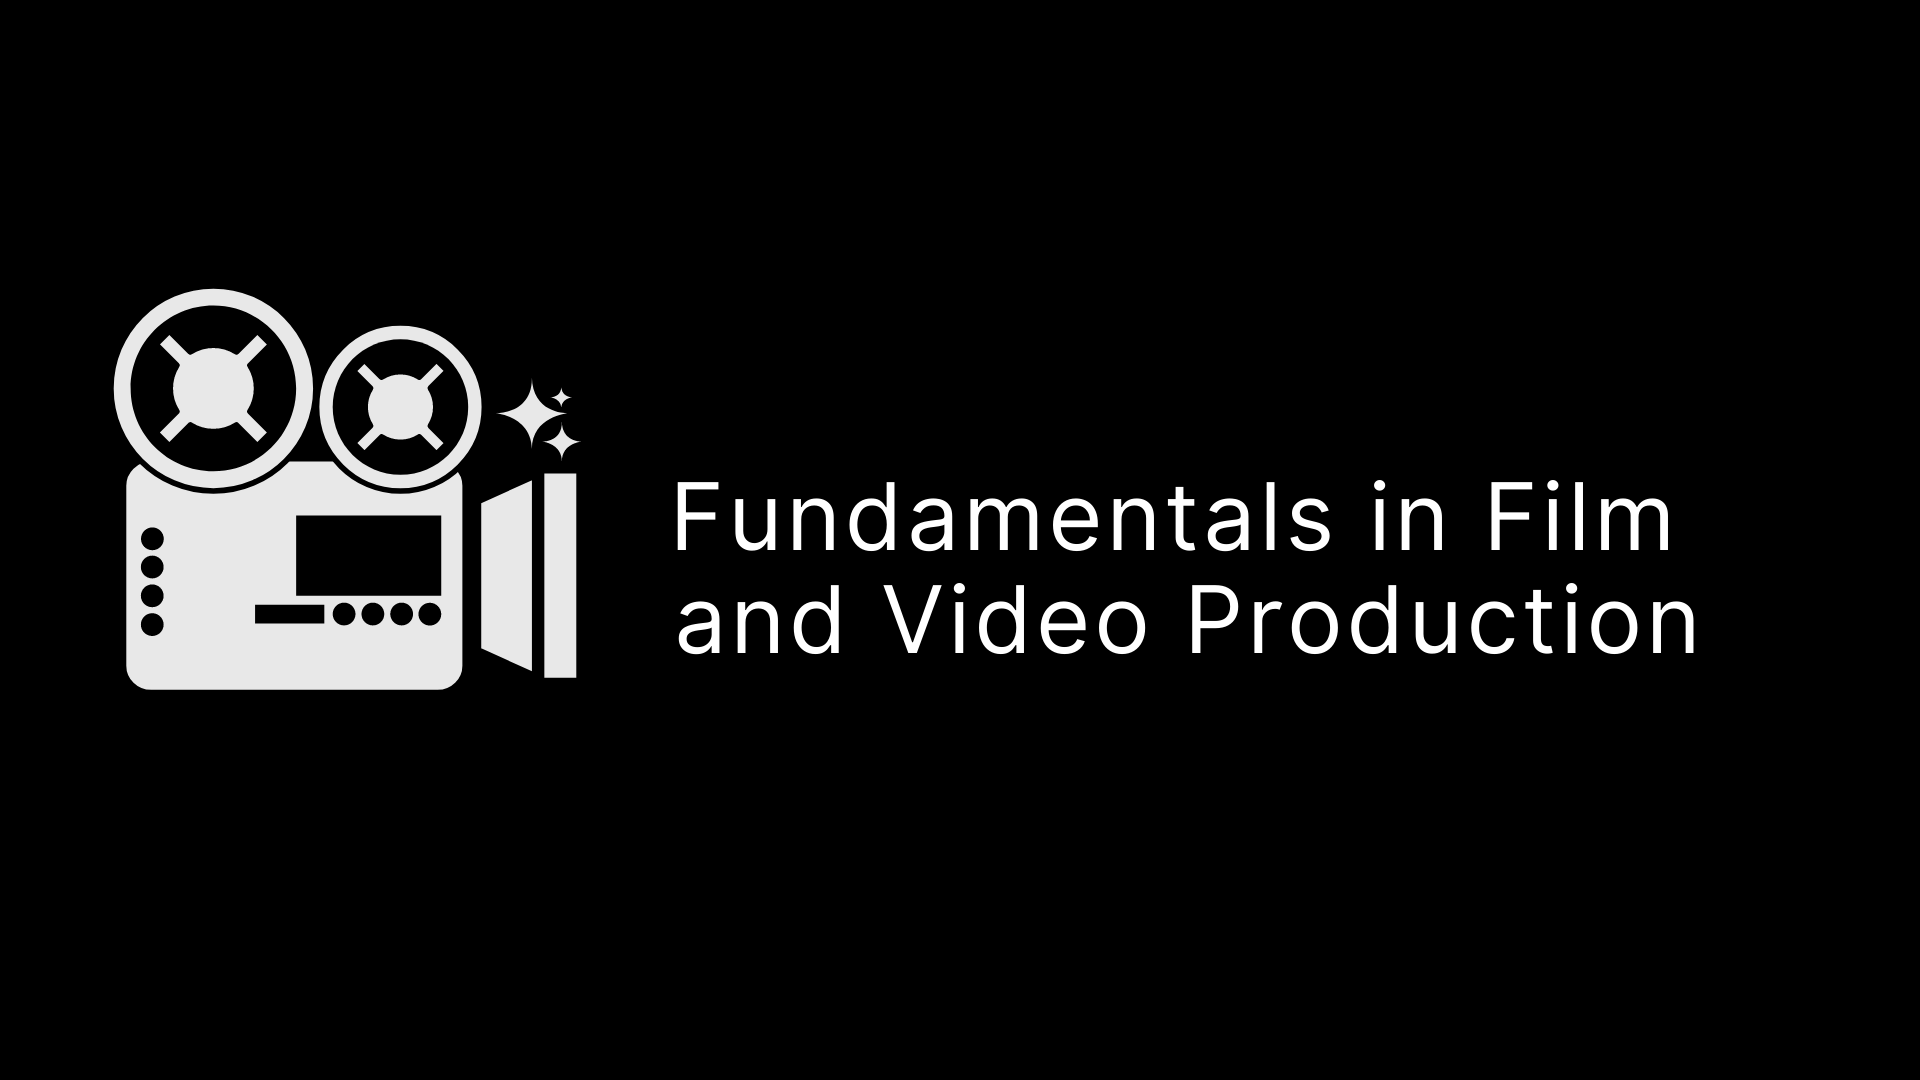 Fundamentals in Film and Video Production